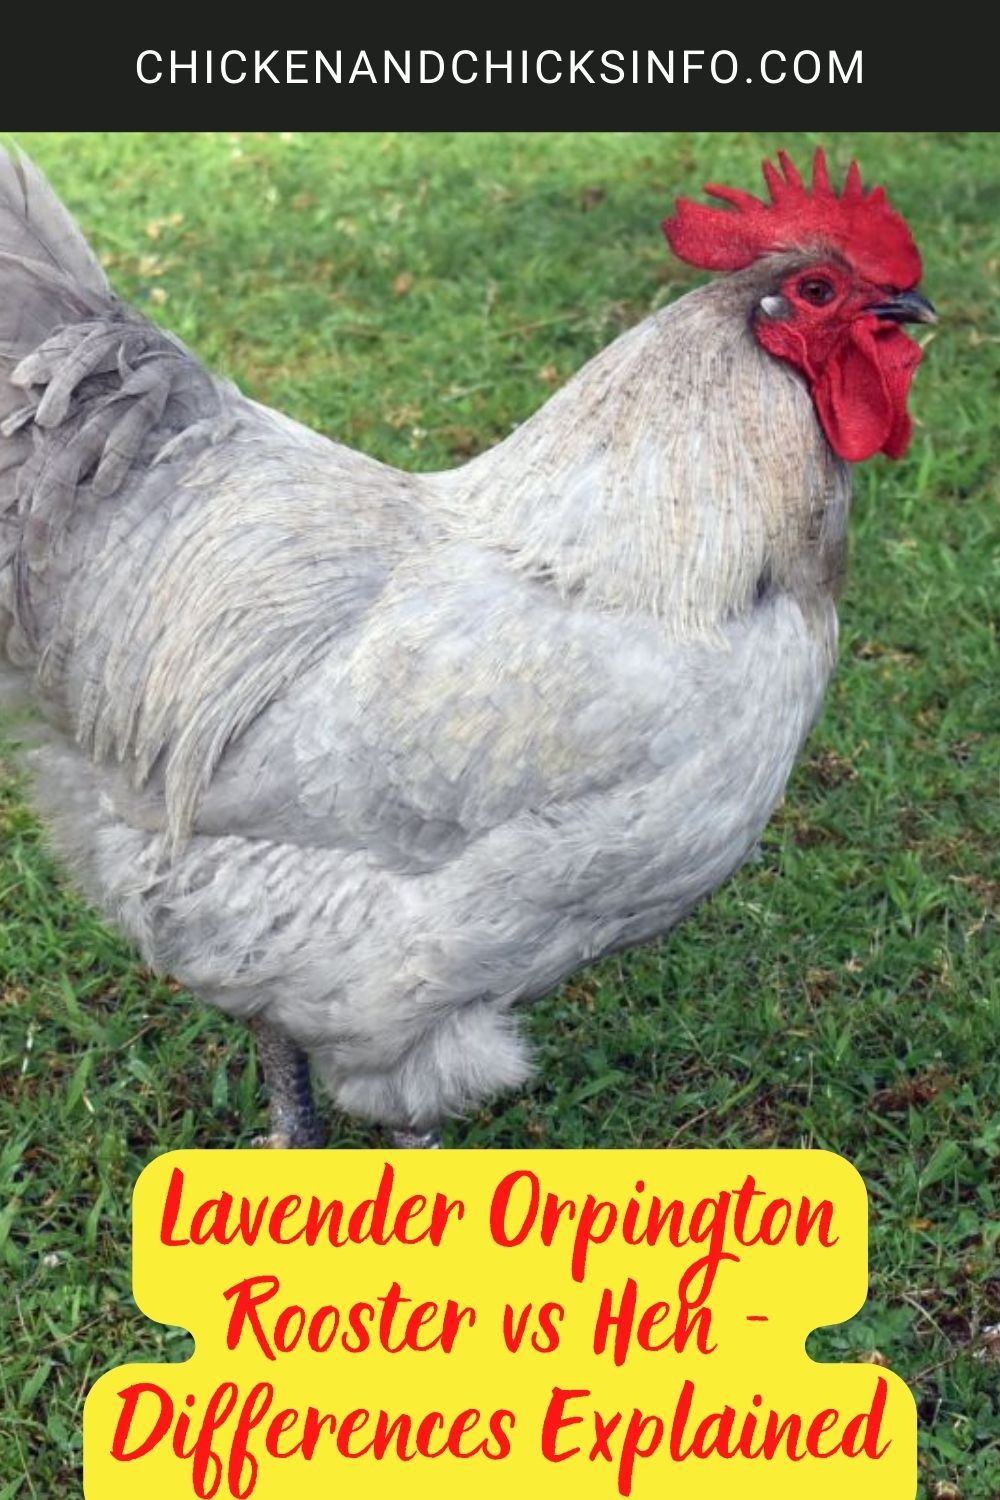 Lavender Orpington Rooster vs Hen - Differences Explained poster.
